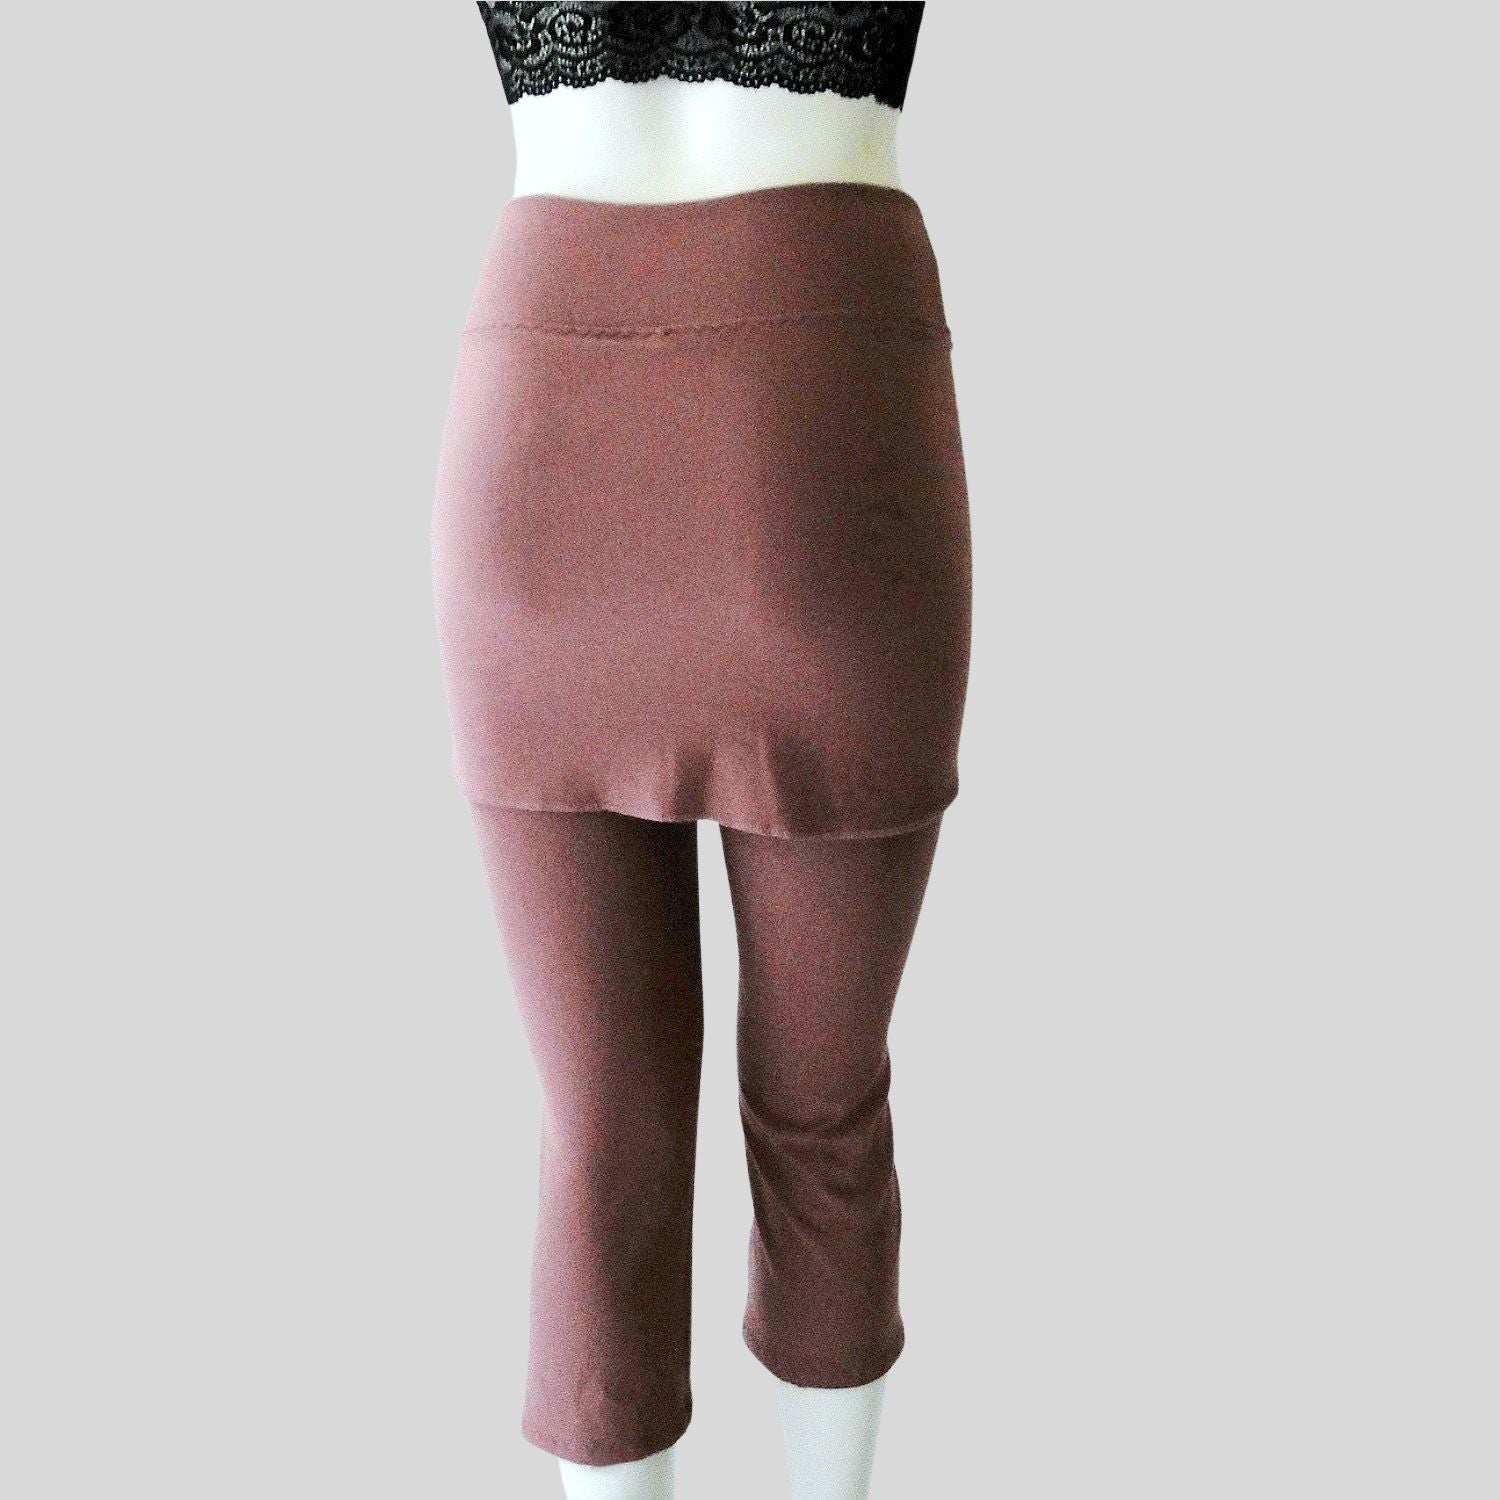 pink yoga pants with wrap skirt - organic cotton bamboo knit | Buy Cropped leggings with wrap skirt